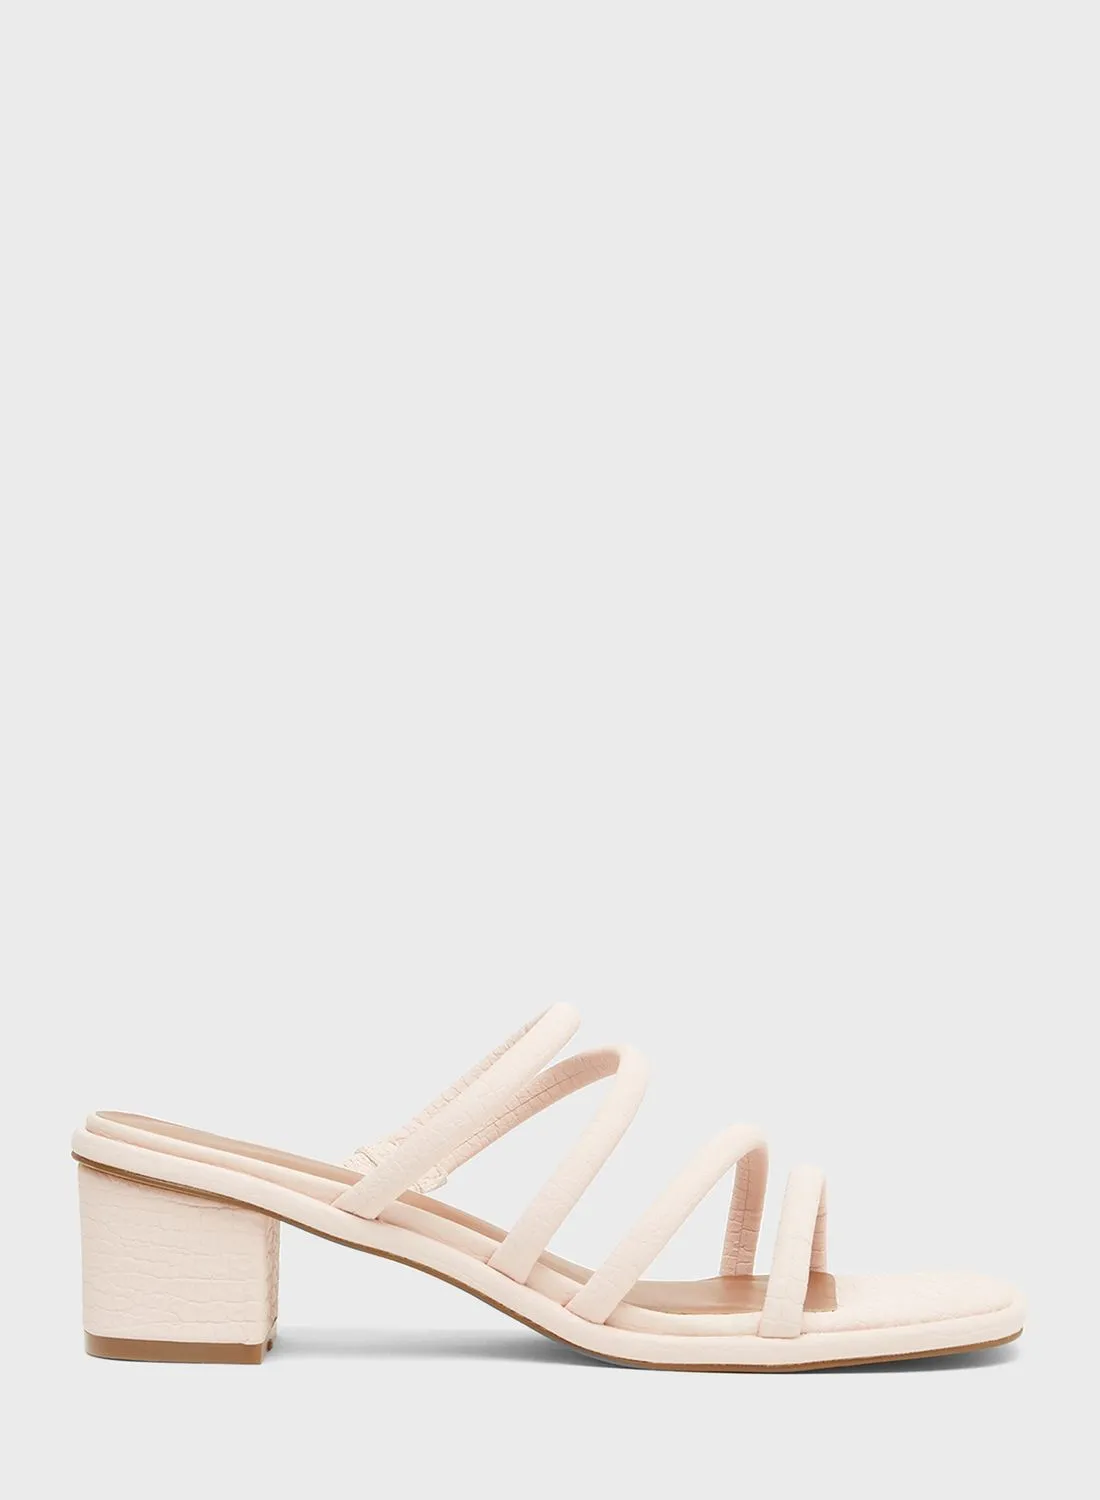 CALL IT SPRING Pennelope Heeled Sandals